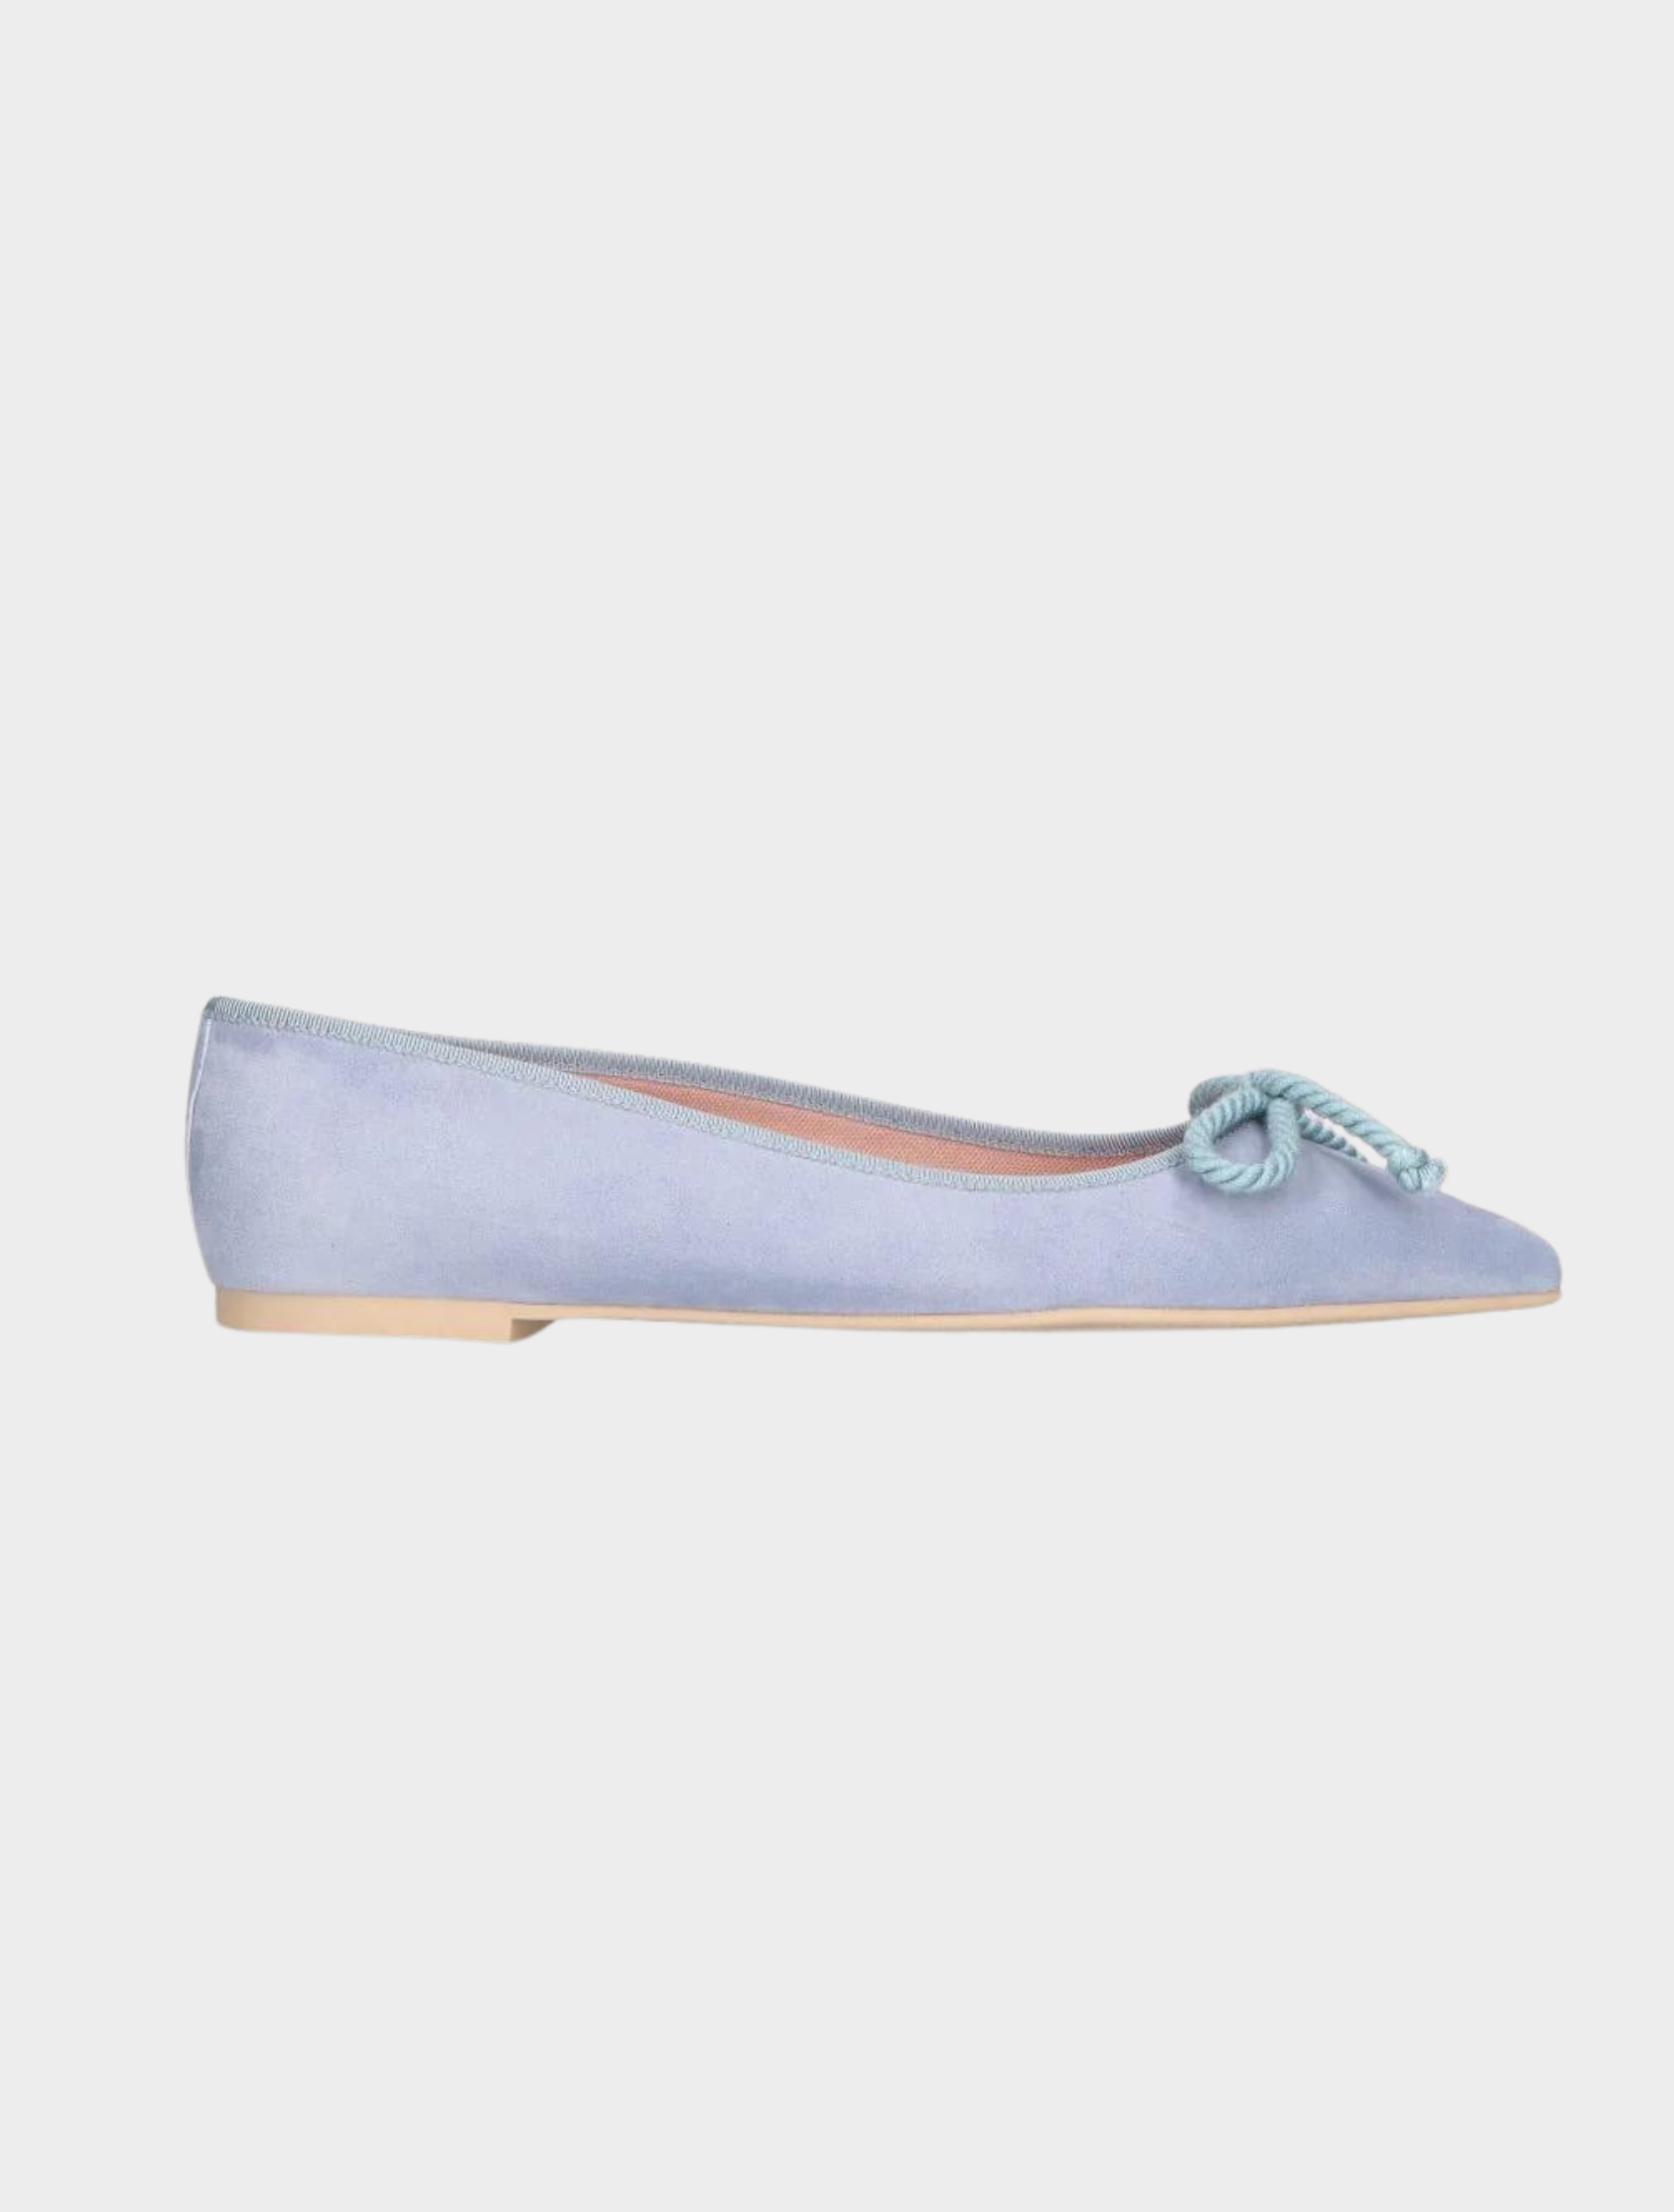 Light blue pointed toe ballet pump with rope bow